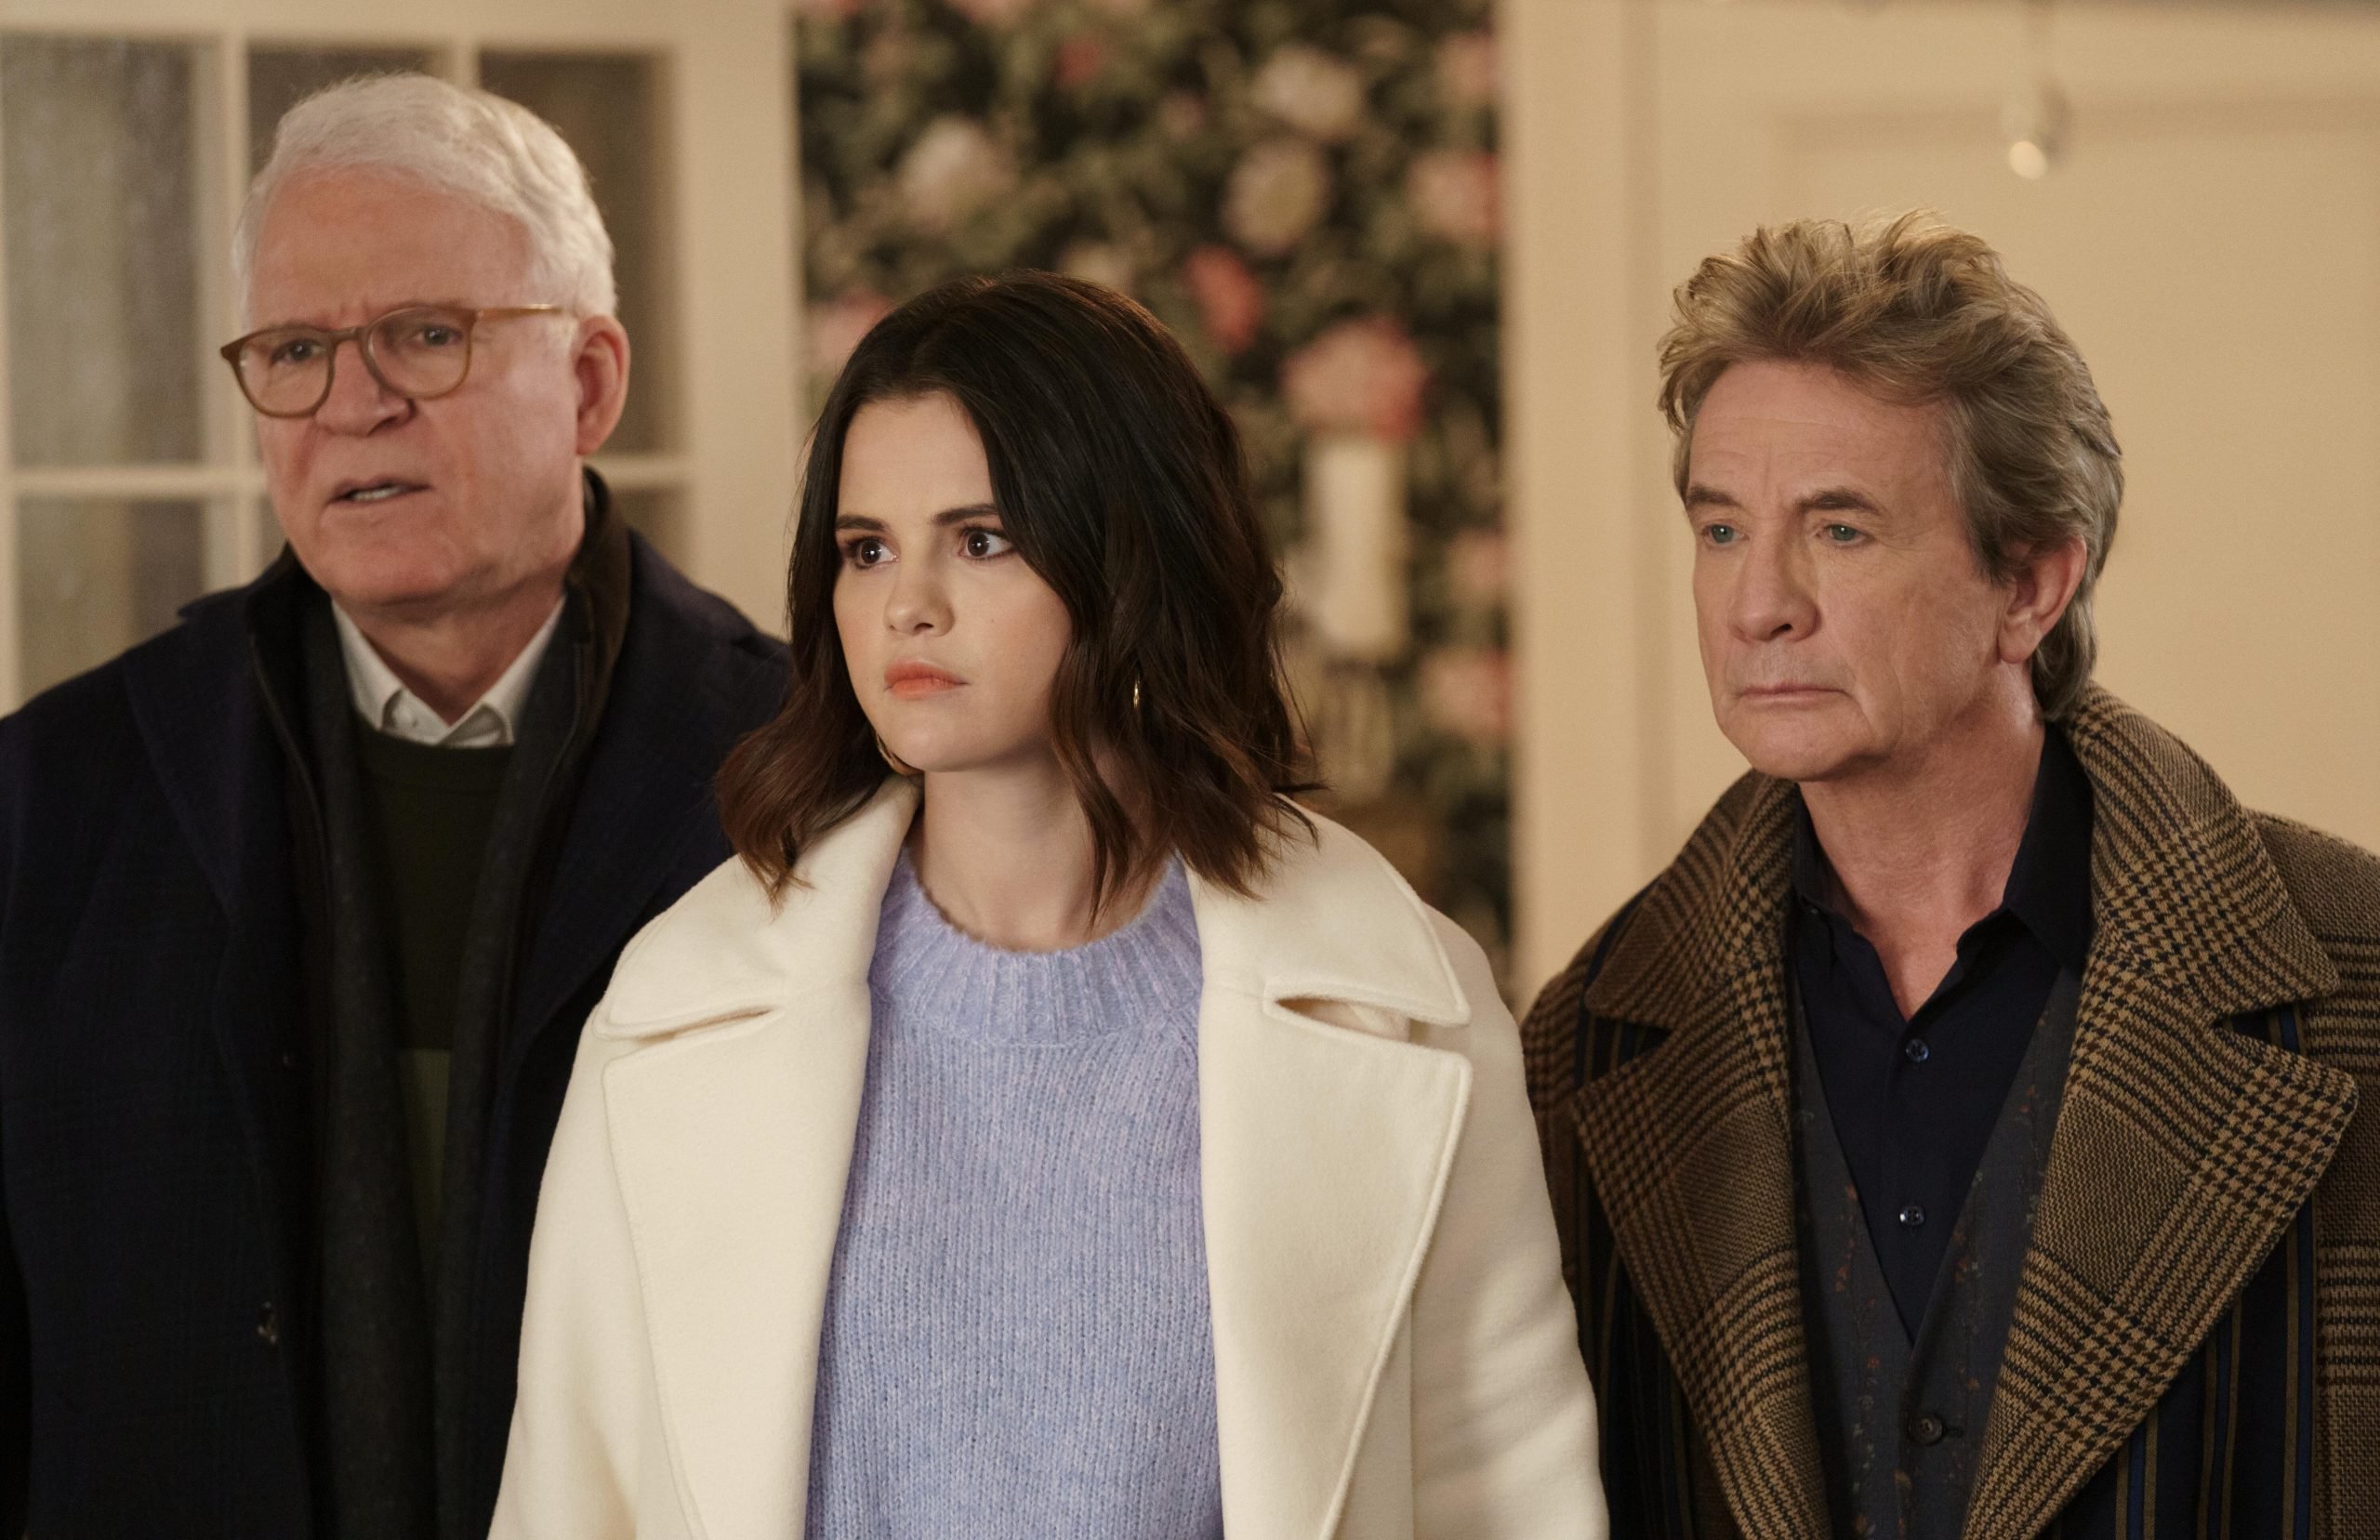 Charles (Steve Martin), Mabel (Selena Gomez) and Oliver (Martin Short) in 'Only Murders in the Building' Season 2